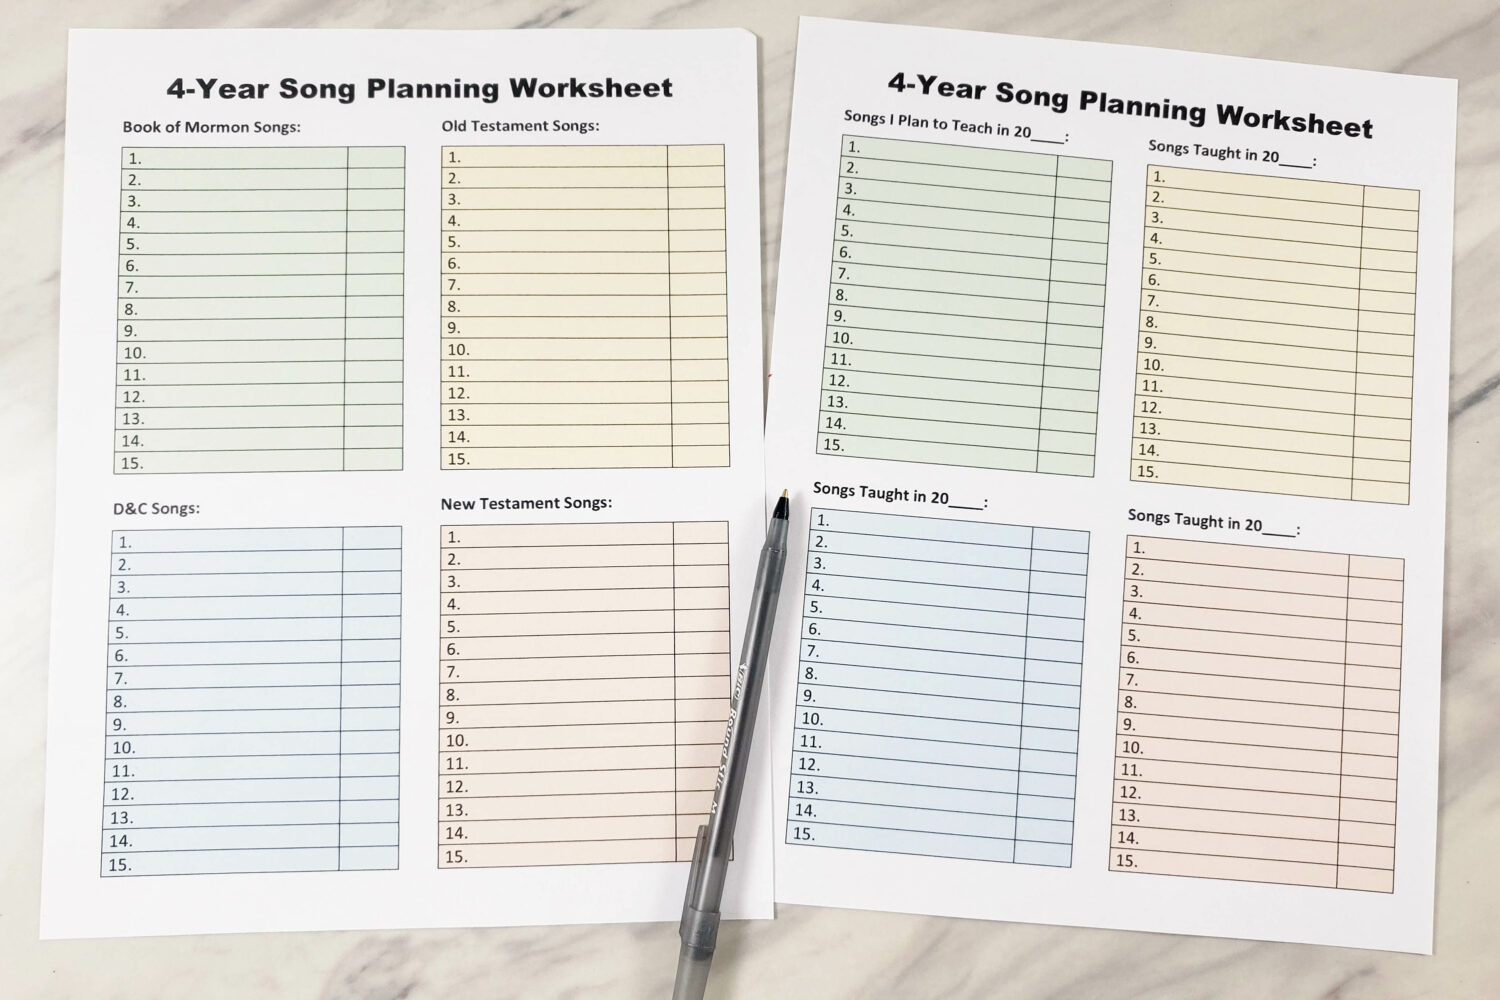 4-Year easy to track Primary Songs Planning Worksheet!! Use this printable to help you track songs you've taught and songs you are planning to teach in future years to keep good records of what songs the kids know and what to teach next during Singing Time! A printable resource for LDS Primary music leaders.